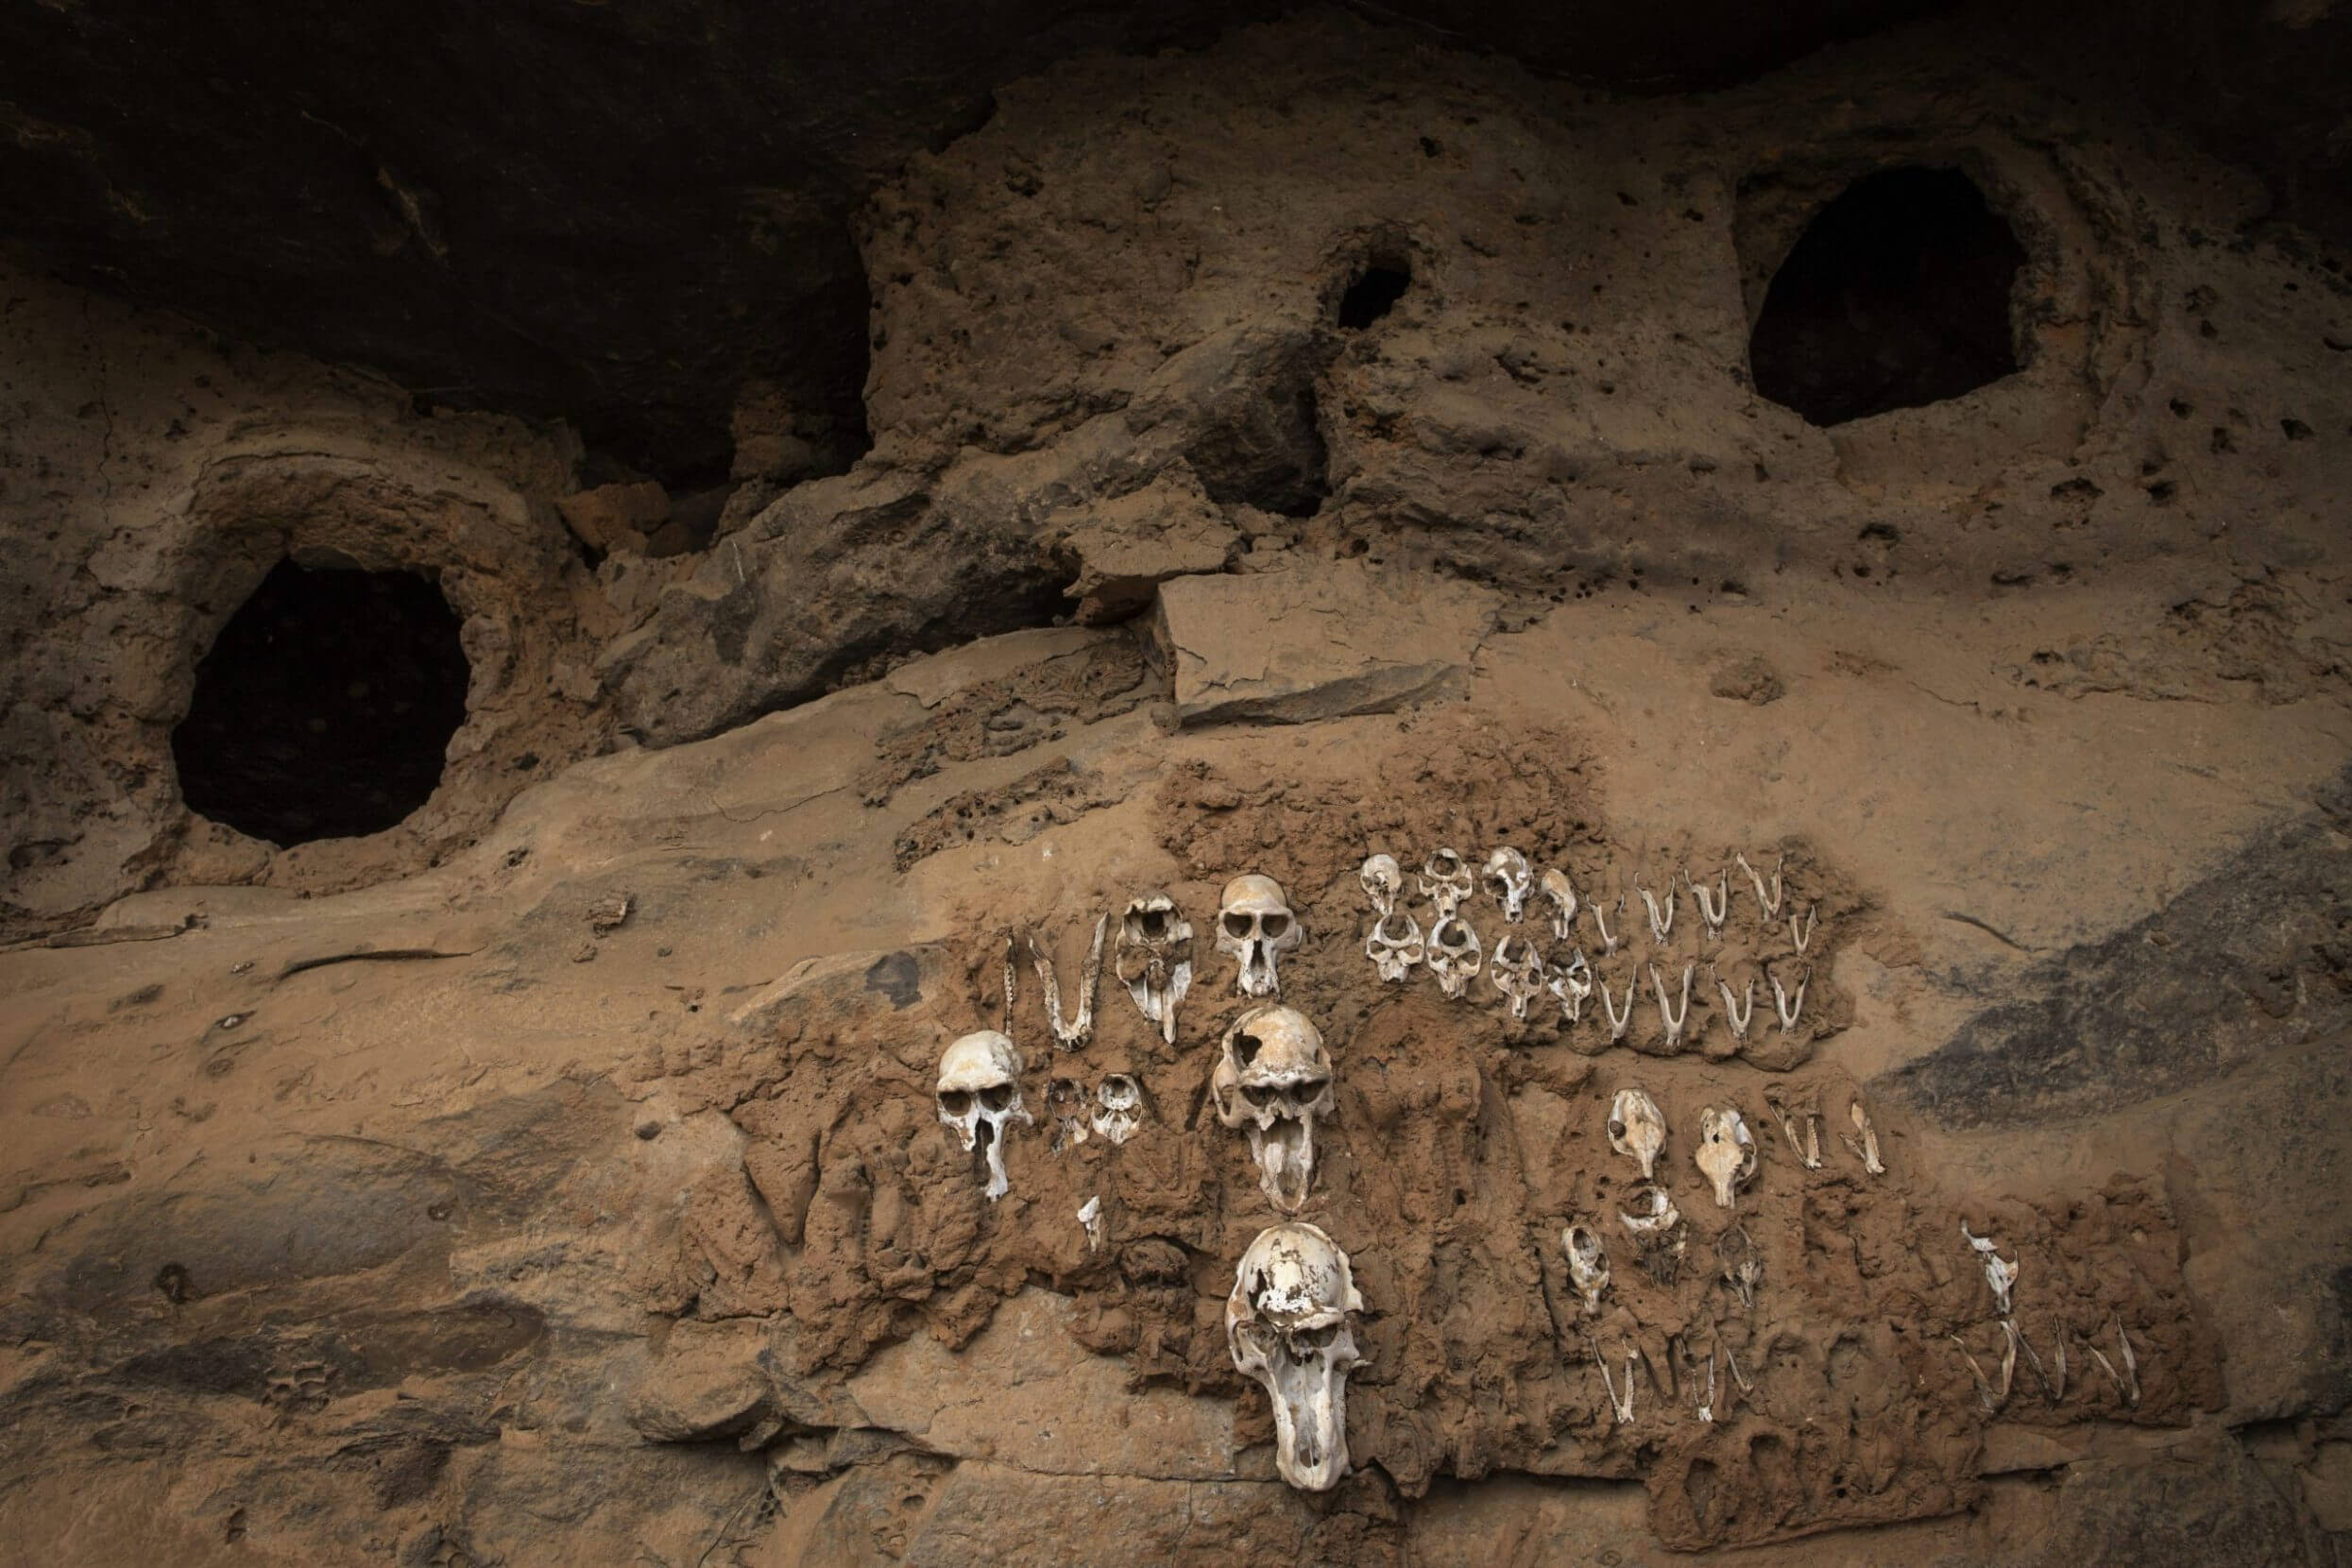 Monkey skulls are seen on the Bandiagara Escarpment in Teli, in the central region of Mali. In the Dogon religion, the skulls are believed to protect the inhabitants of the Escarpment from wild animals.